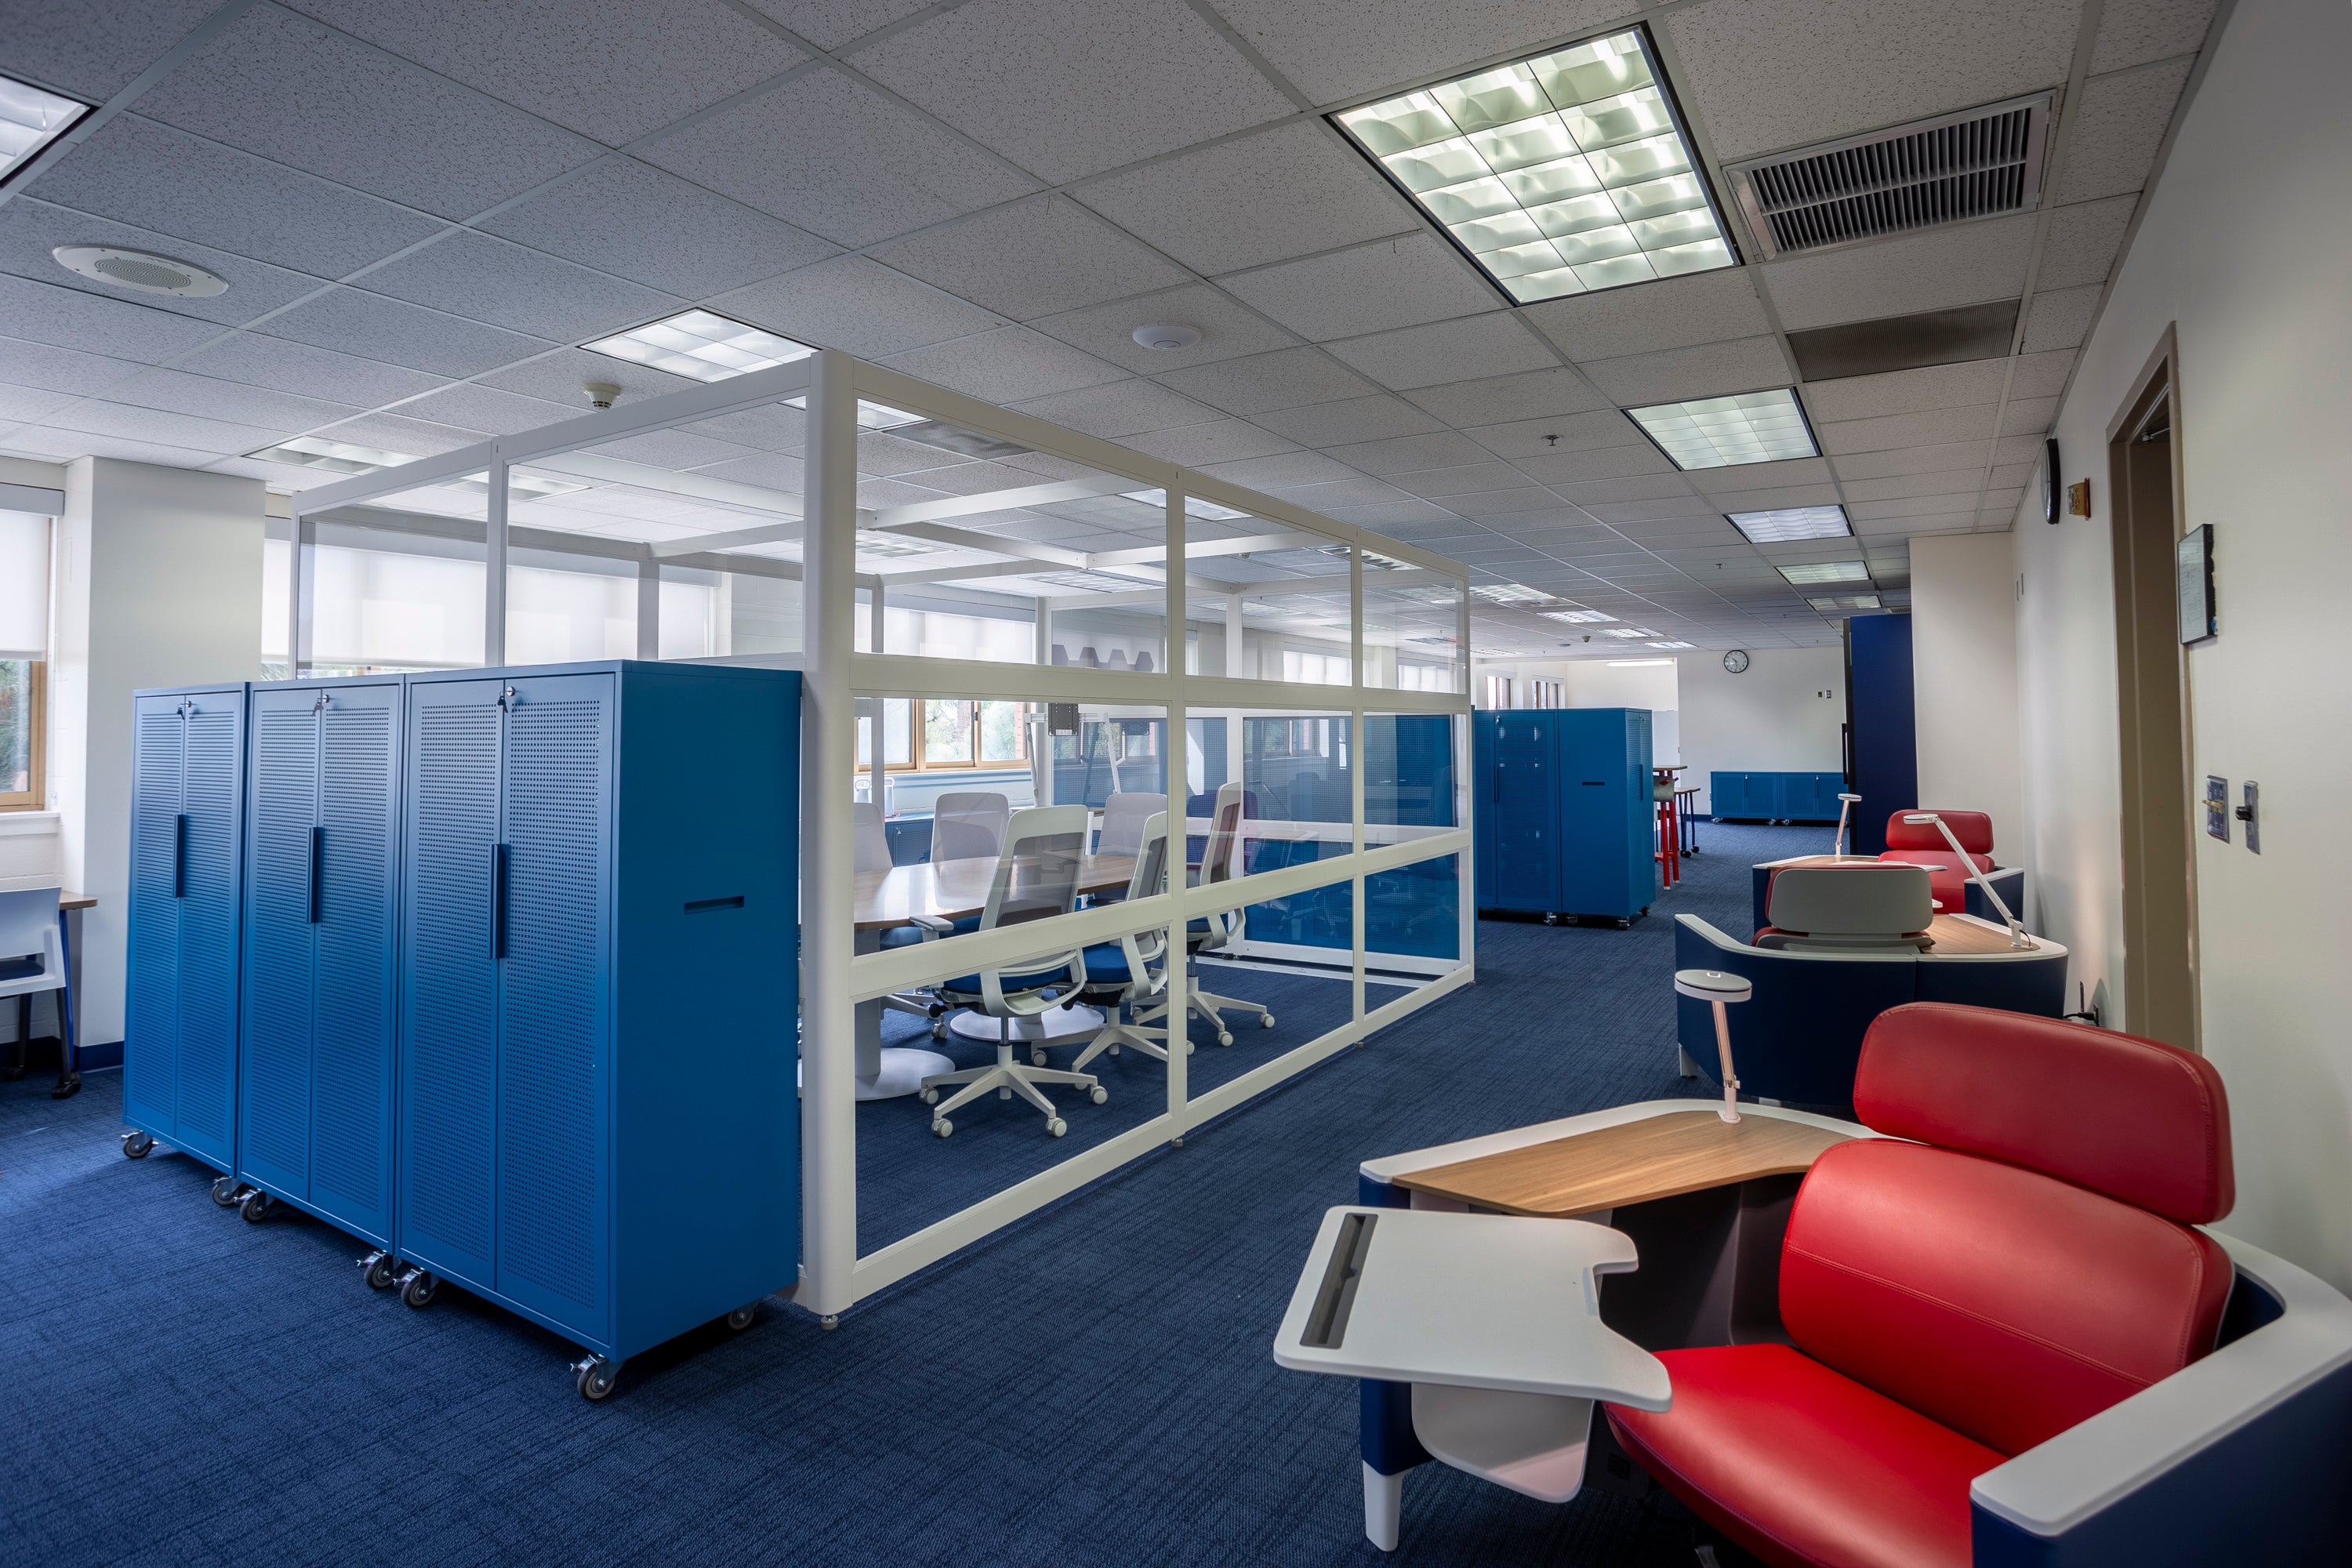 Teacher workroom image with tall storage cabinets, a small glassed in conference room, and flexible seating.